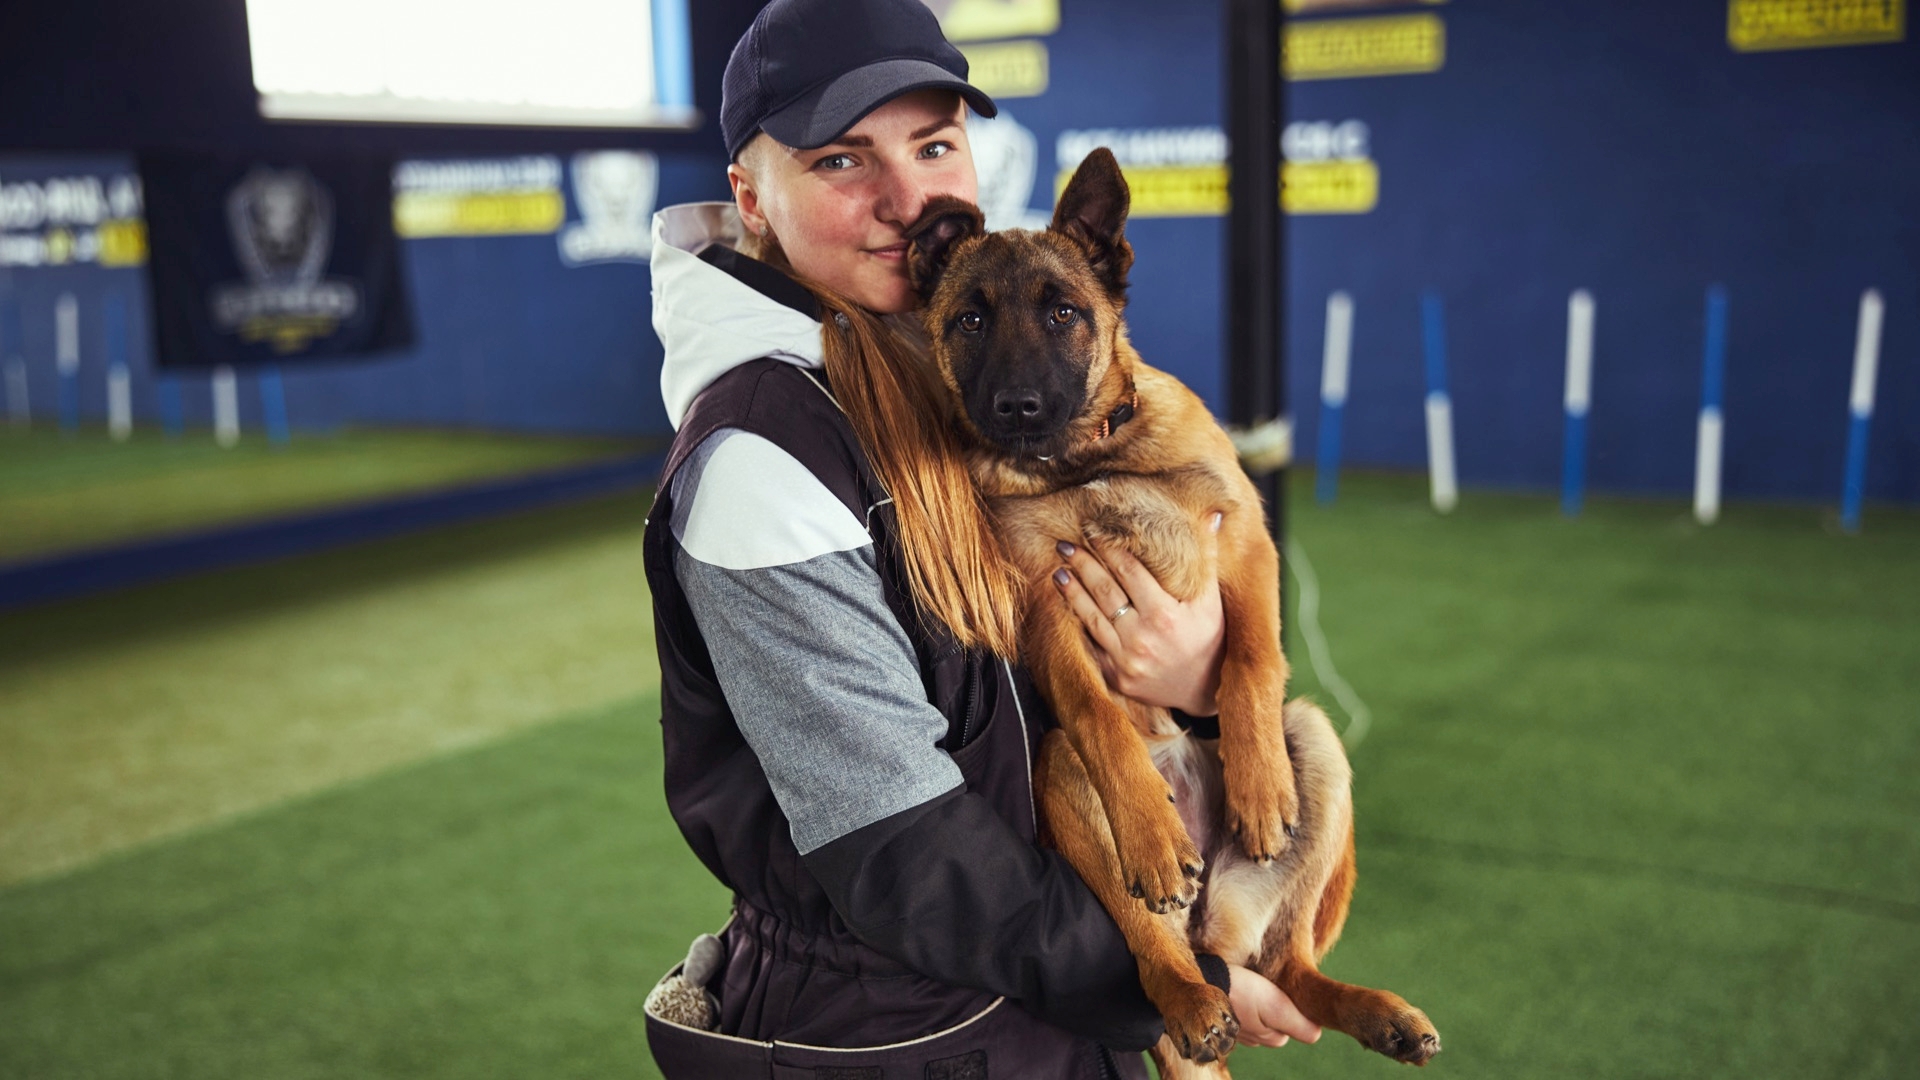 Questions Your Should Ask A Dog Training Professional Before You Hire Them